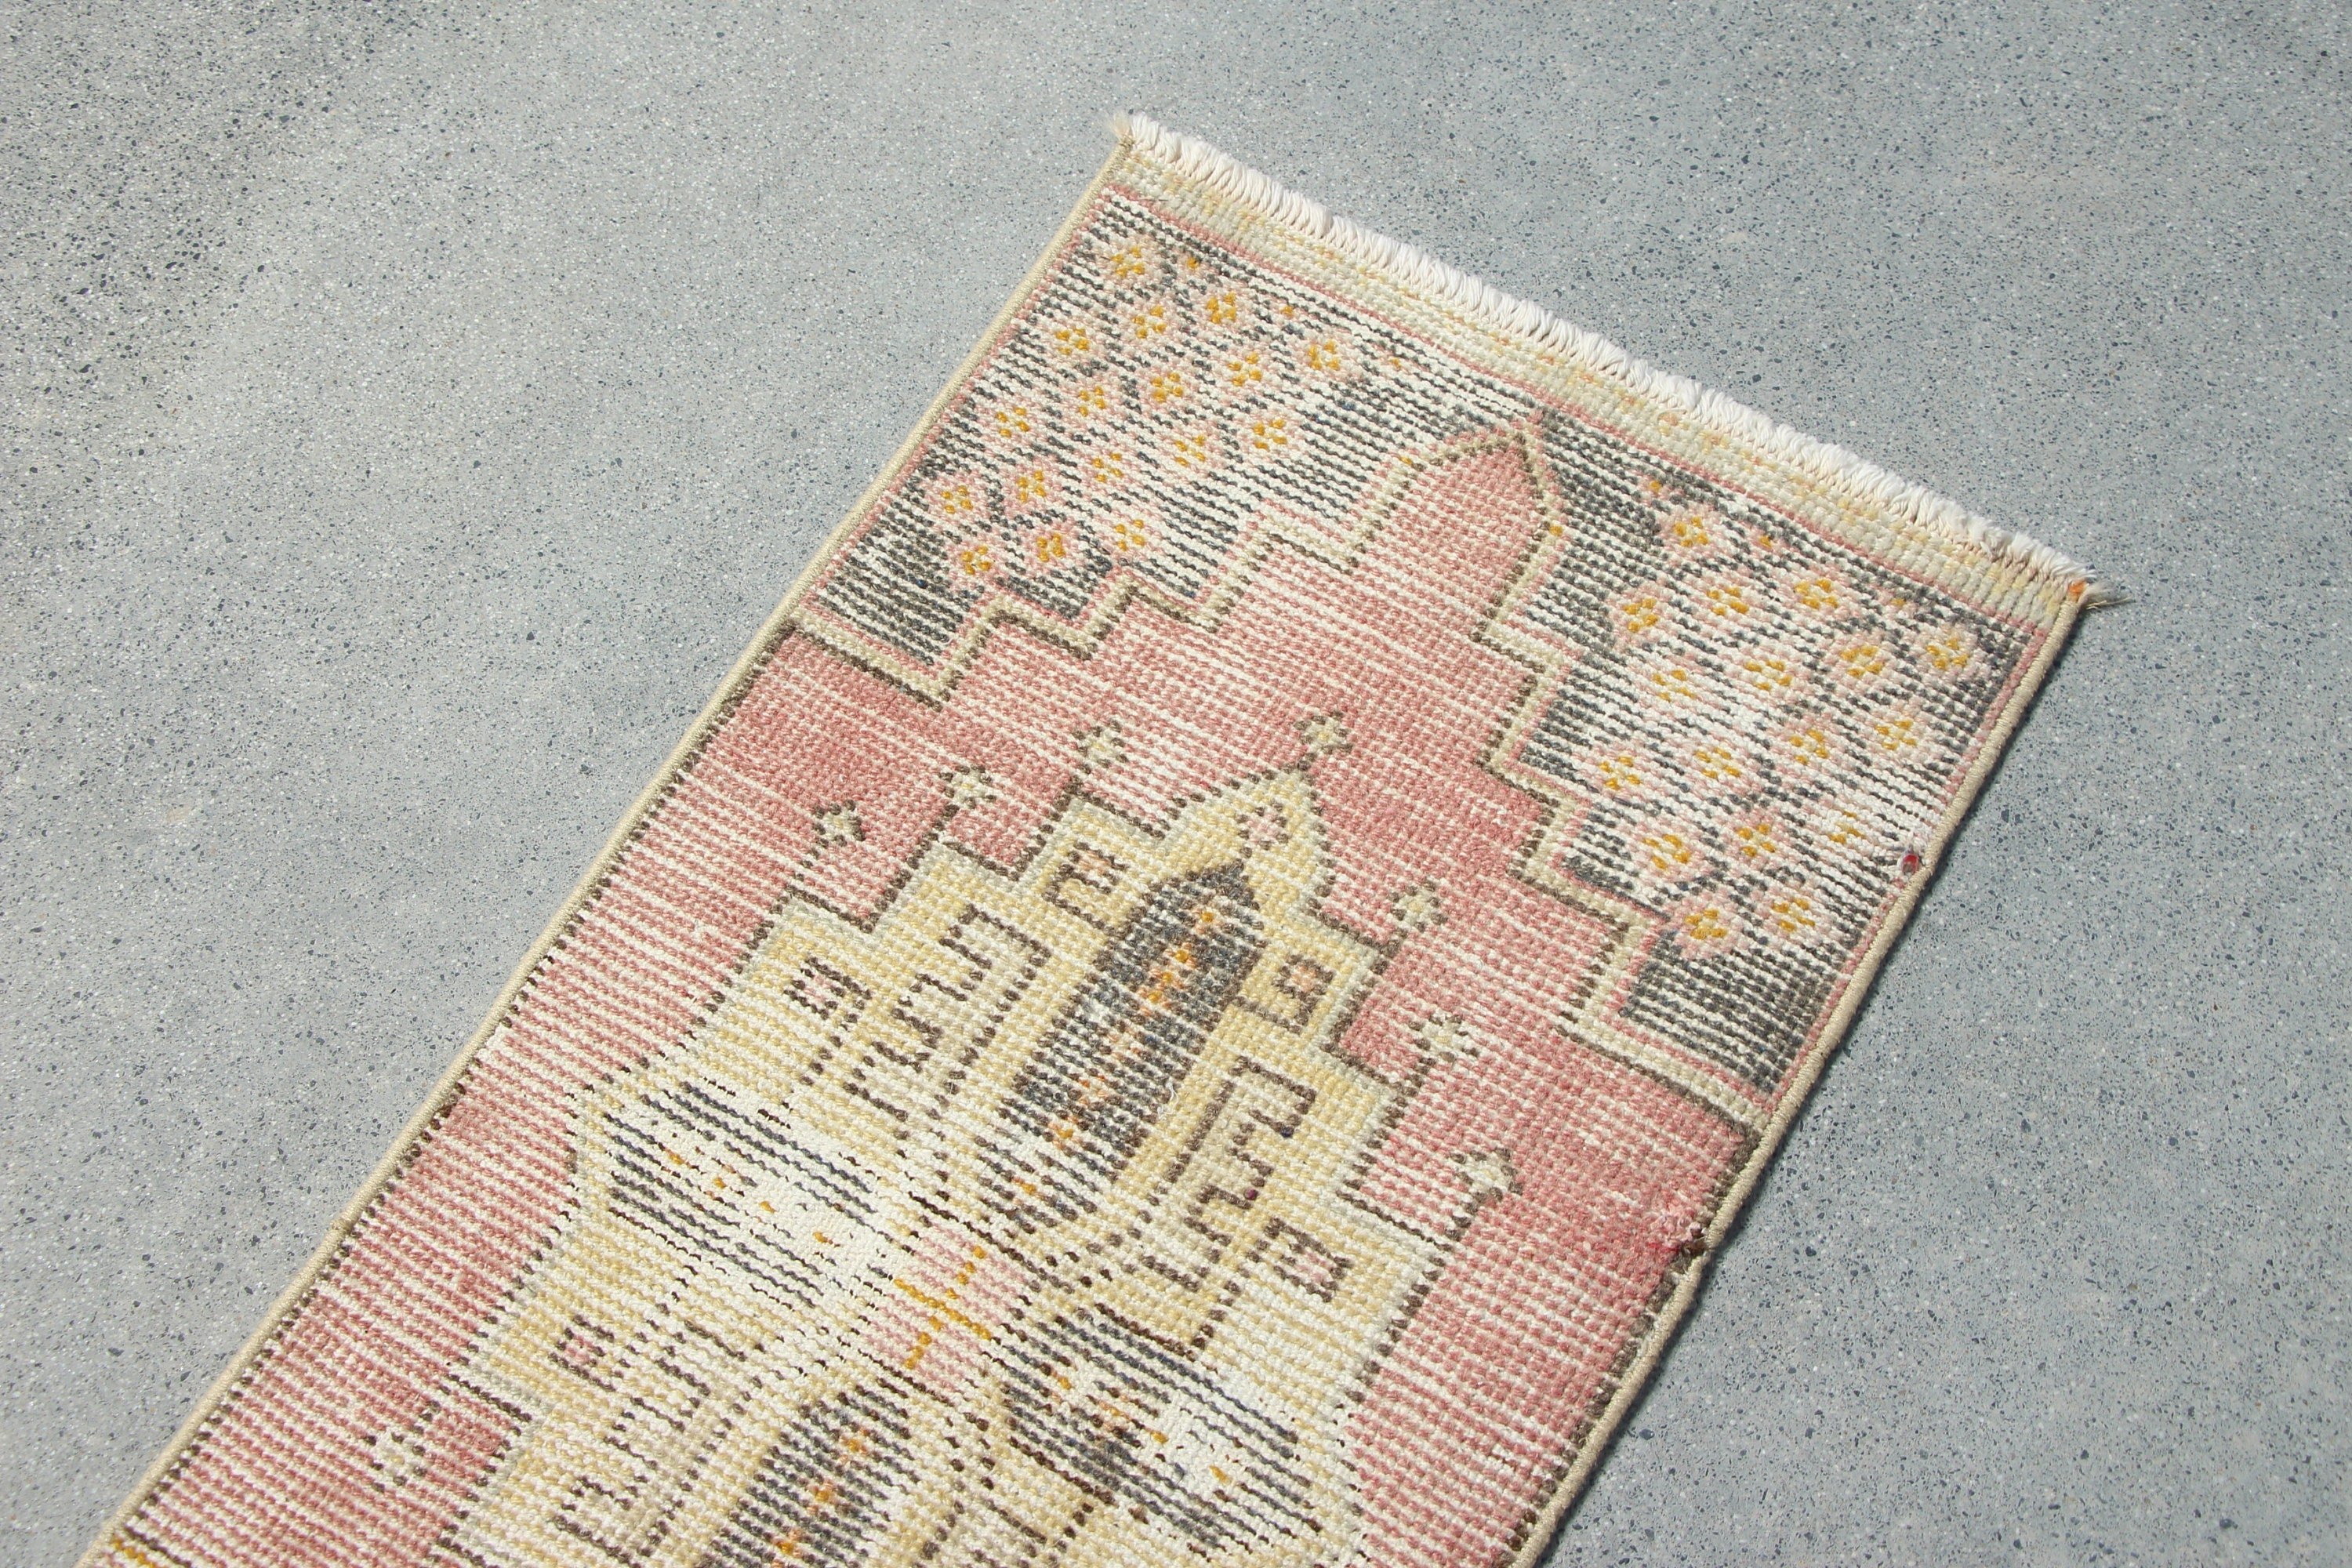 Wall Hanging Rugs, Floor Rug, Pink Cool Rugs, 1.4x3 ft Small Rug, Turkish Rug, Kitchen Rug, Rugs for Entry, Vintage Rug